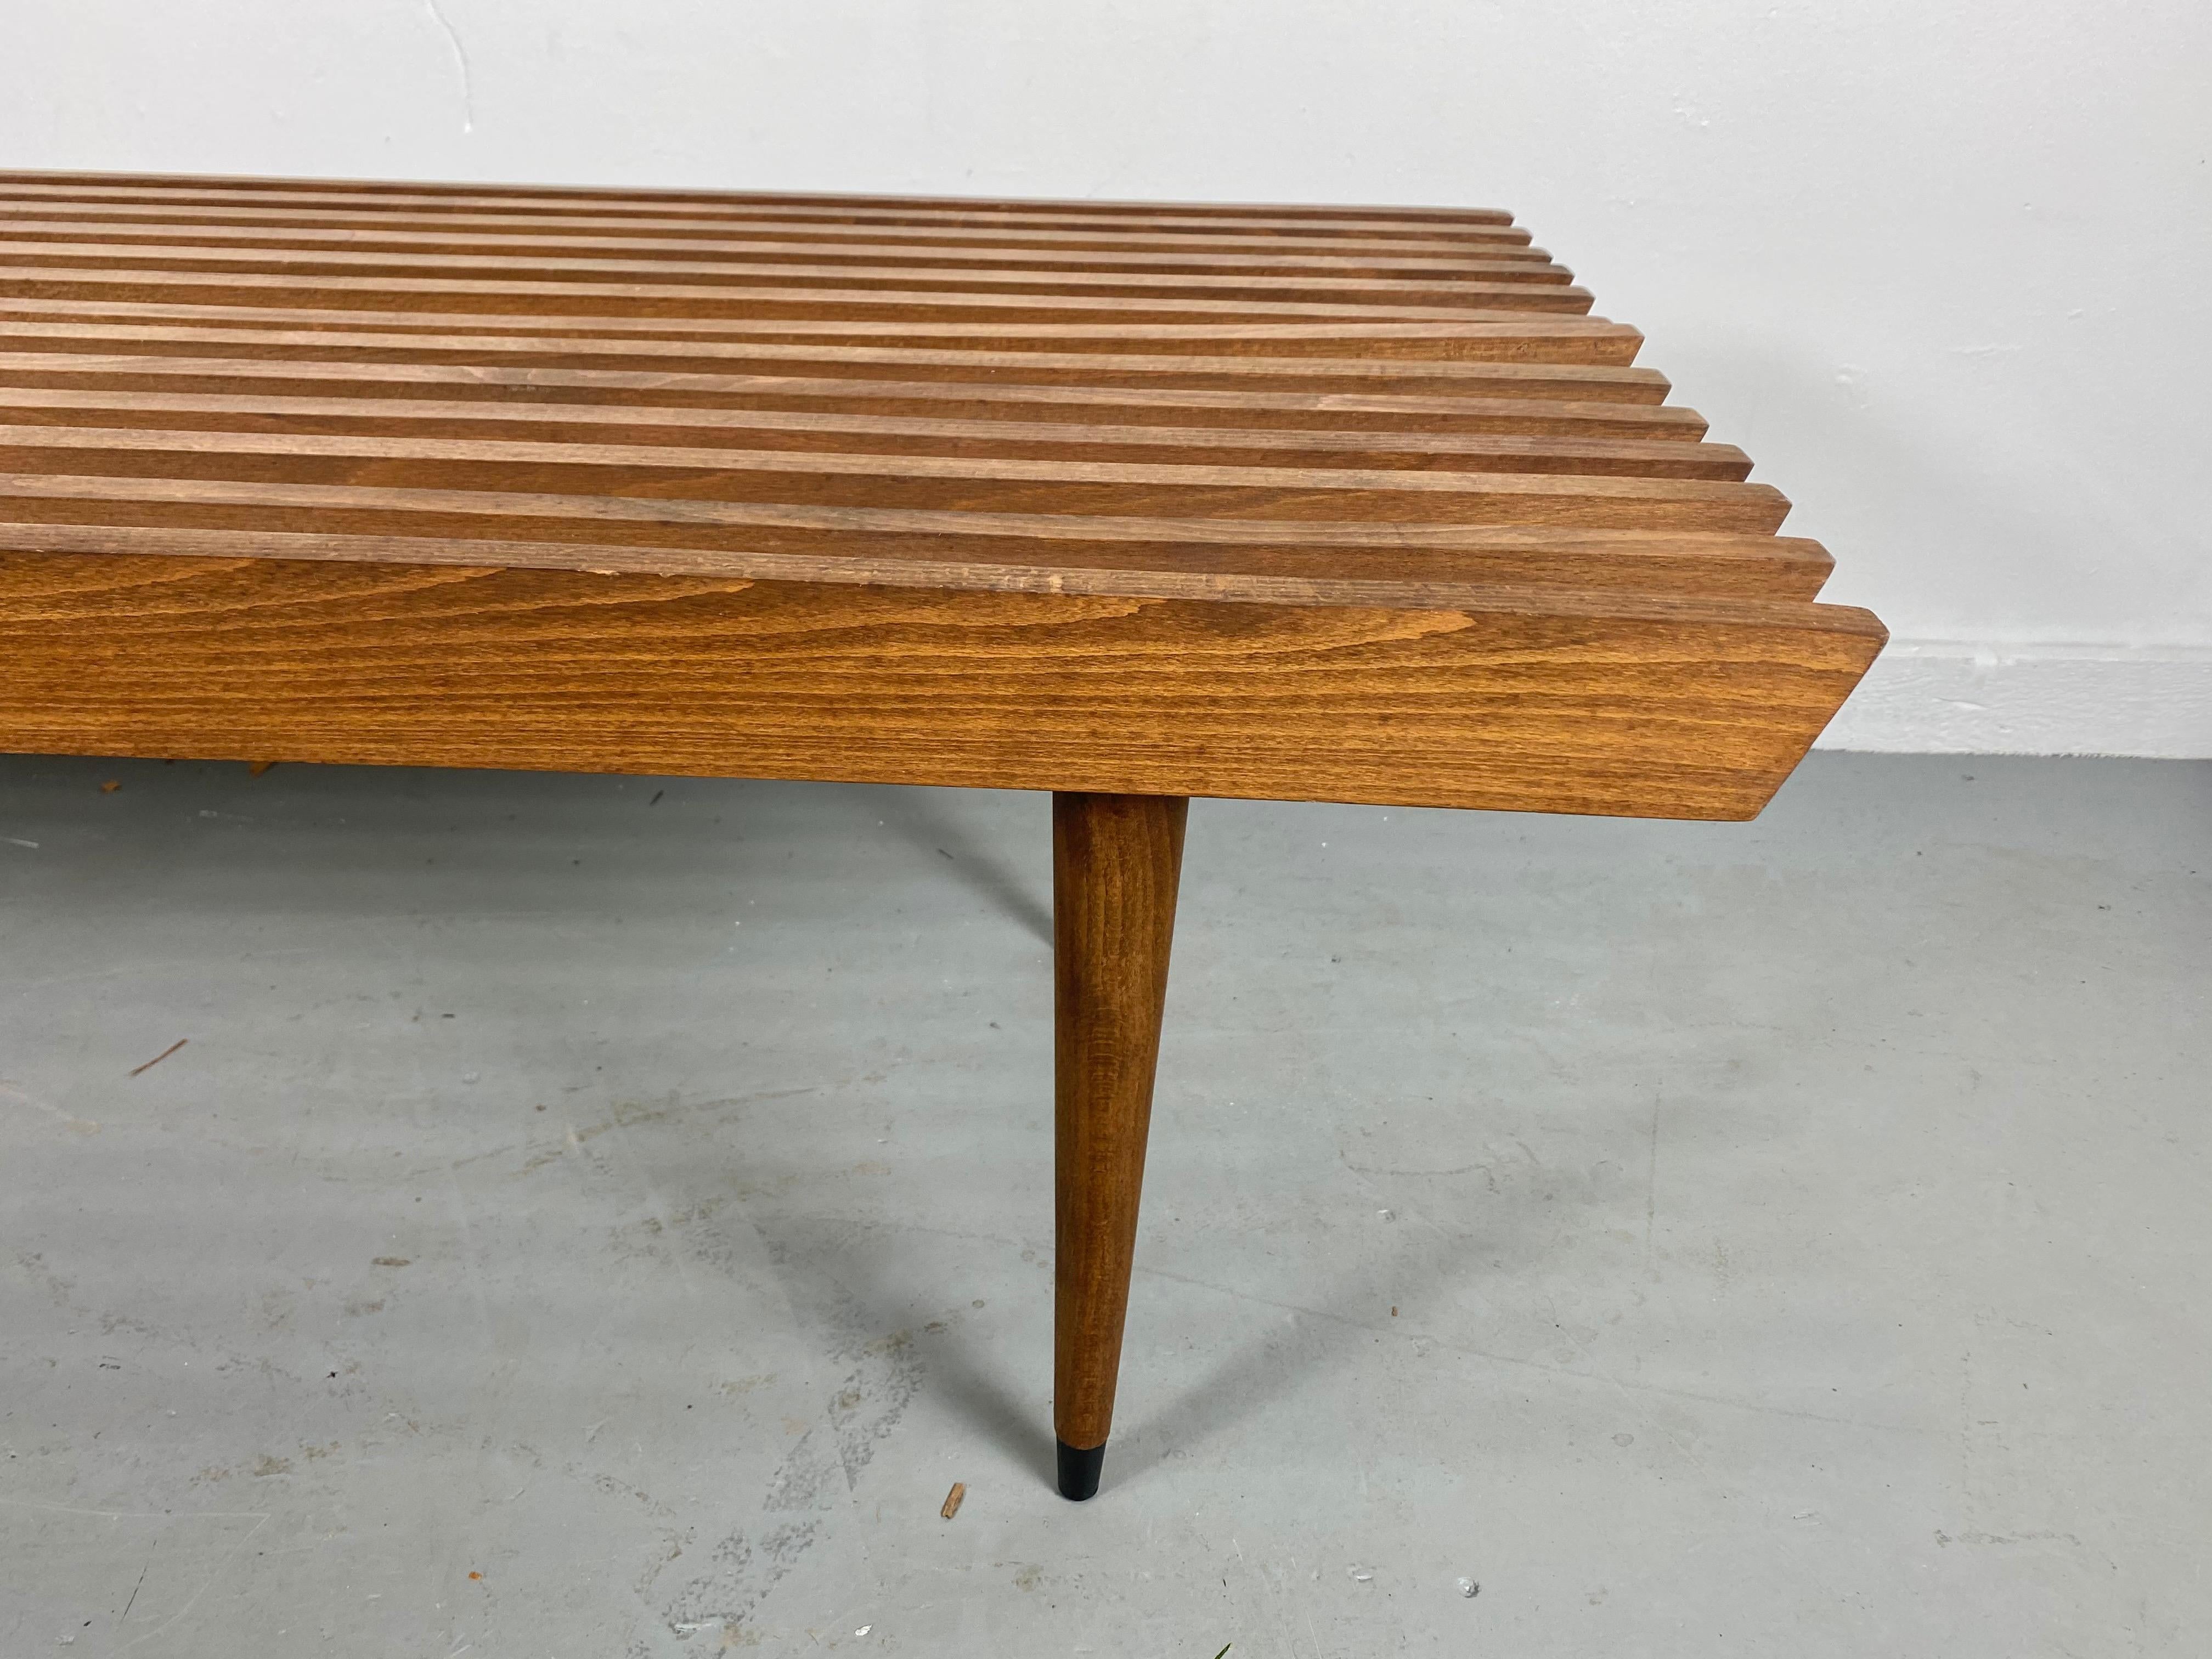 Italian Classic Mid-Century Modern Slat Bench/ Table with Tapered Legs, 1960's